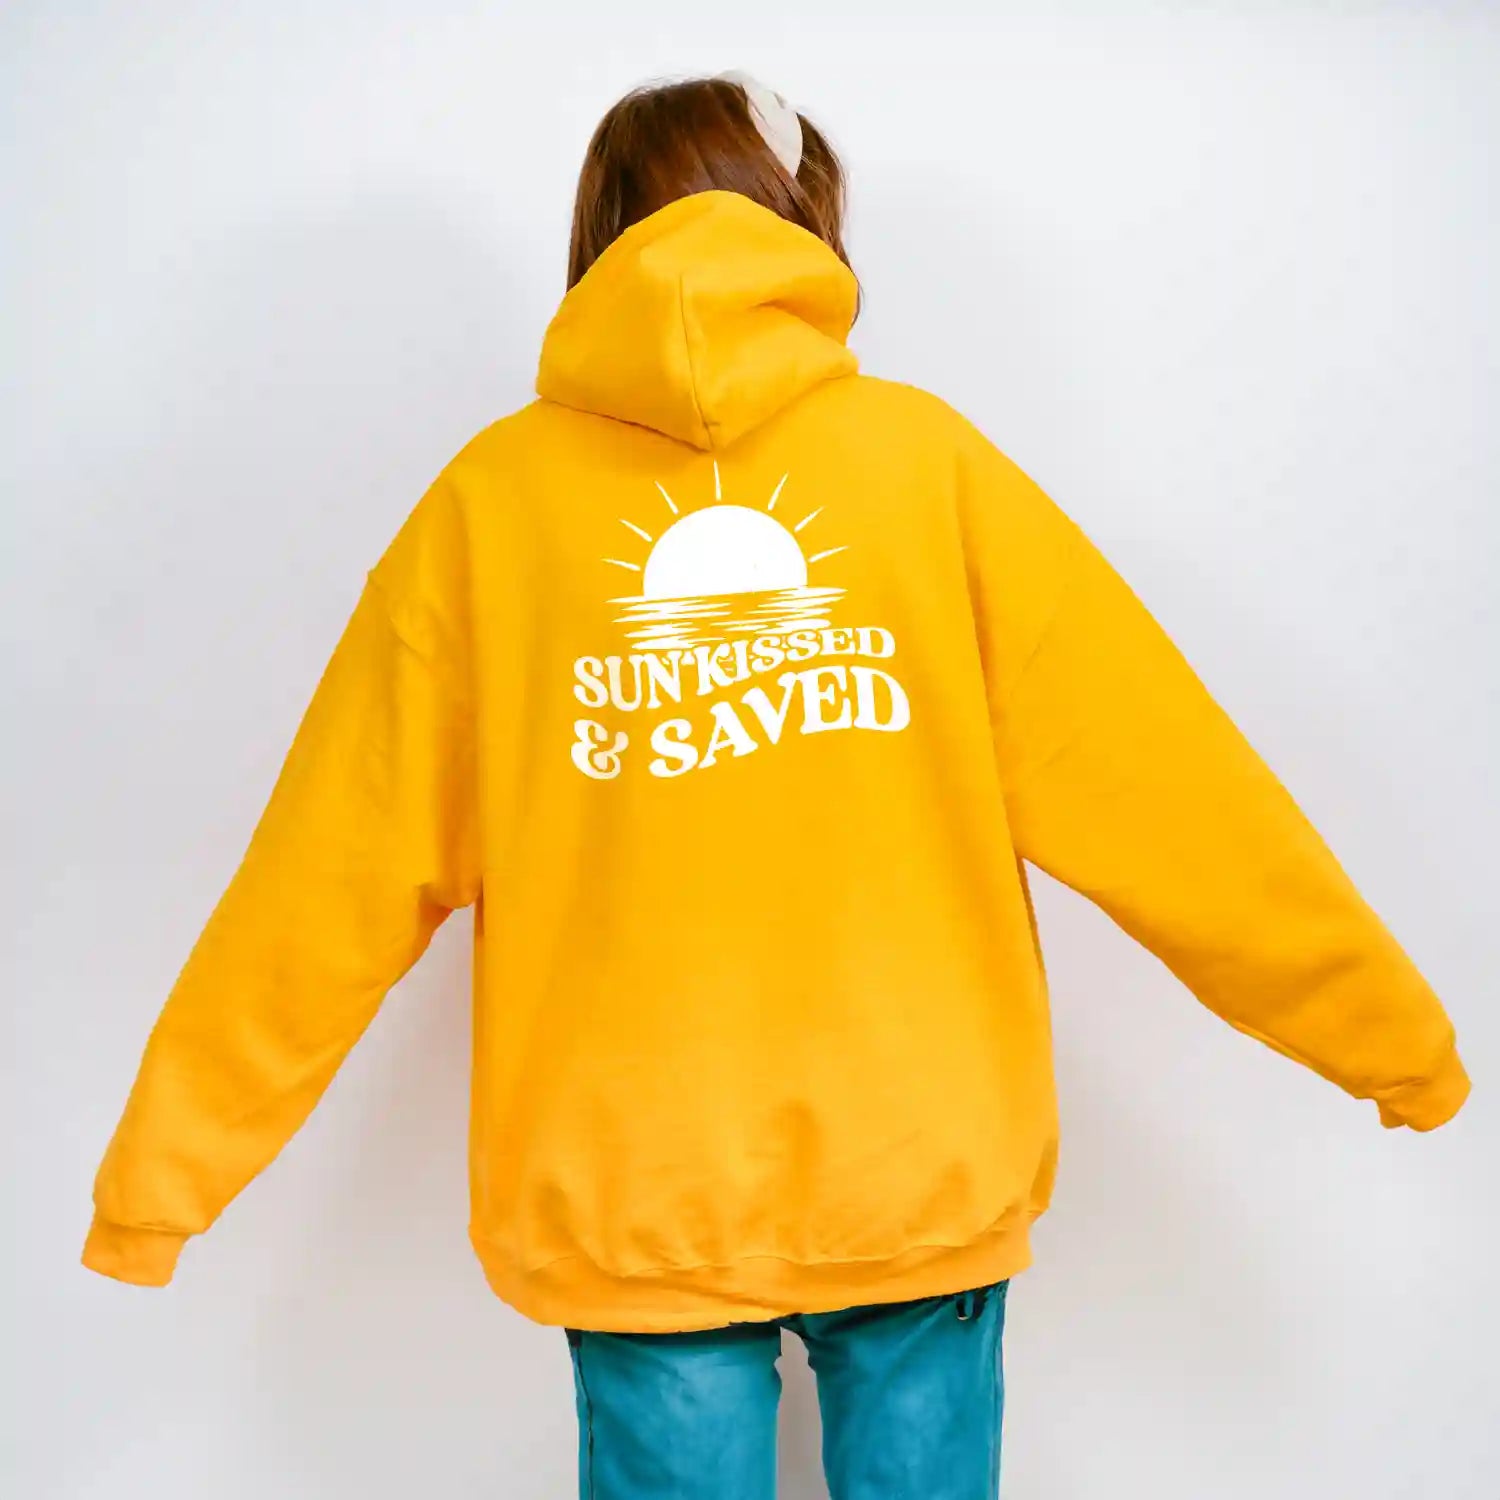 A woman wearing a Sunkissed & Saved Hoodie from Be Still and Know looks sunkissed.